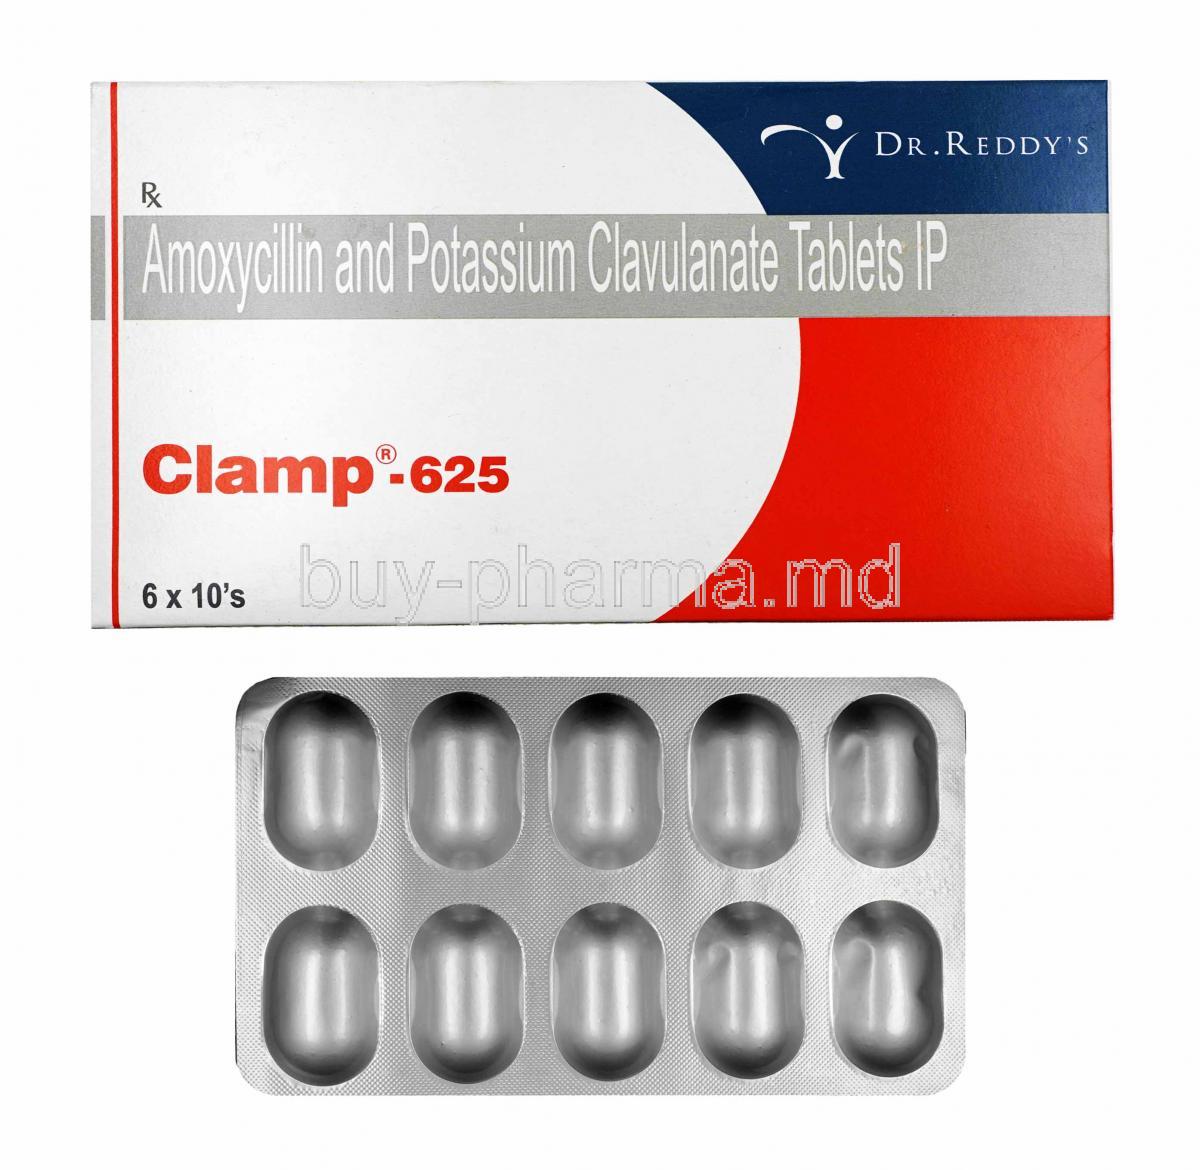 Clamp, Amoxycillin and Clavulanic Acid box and tablets